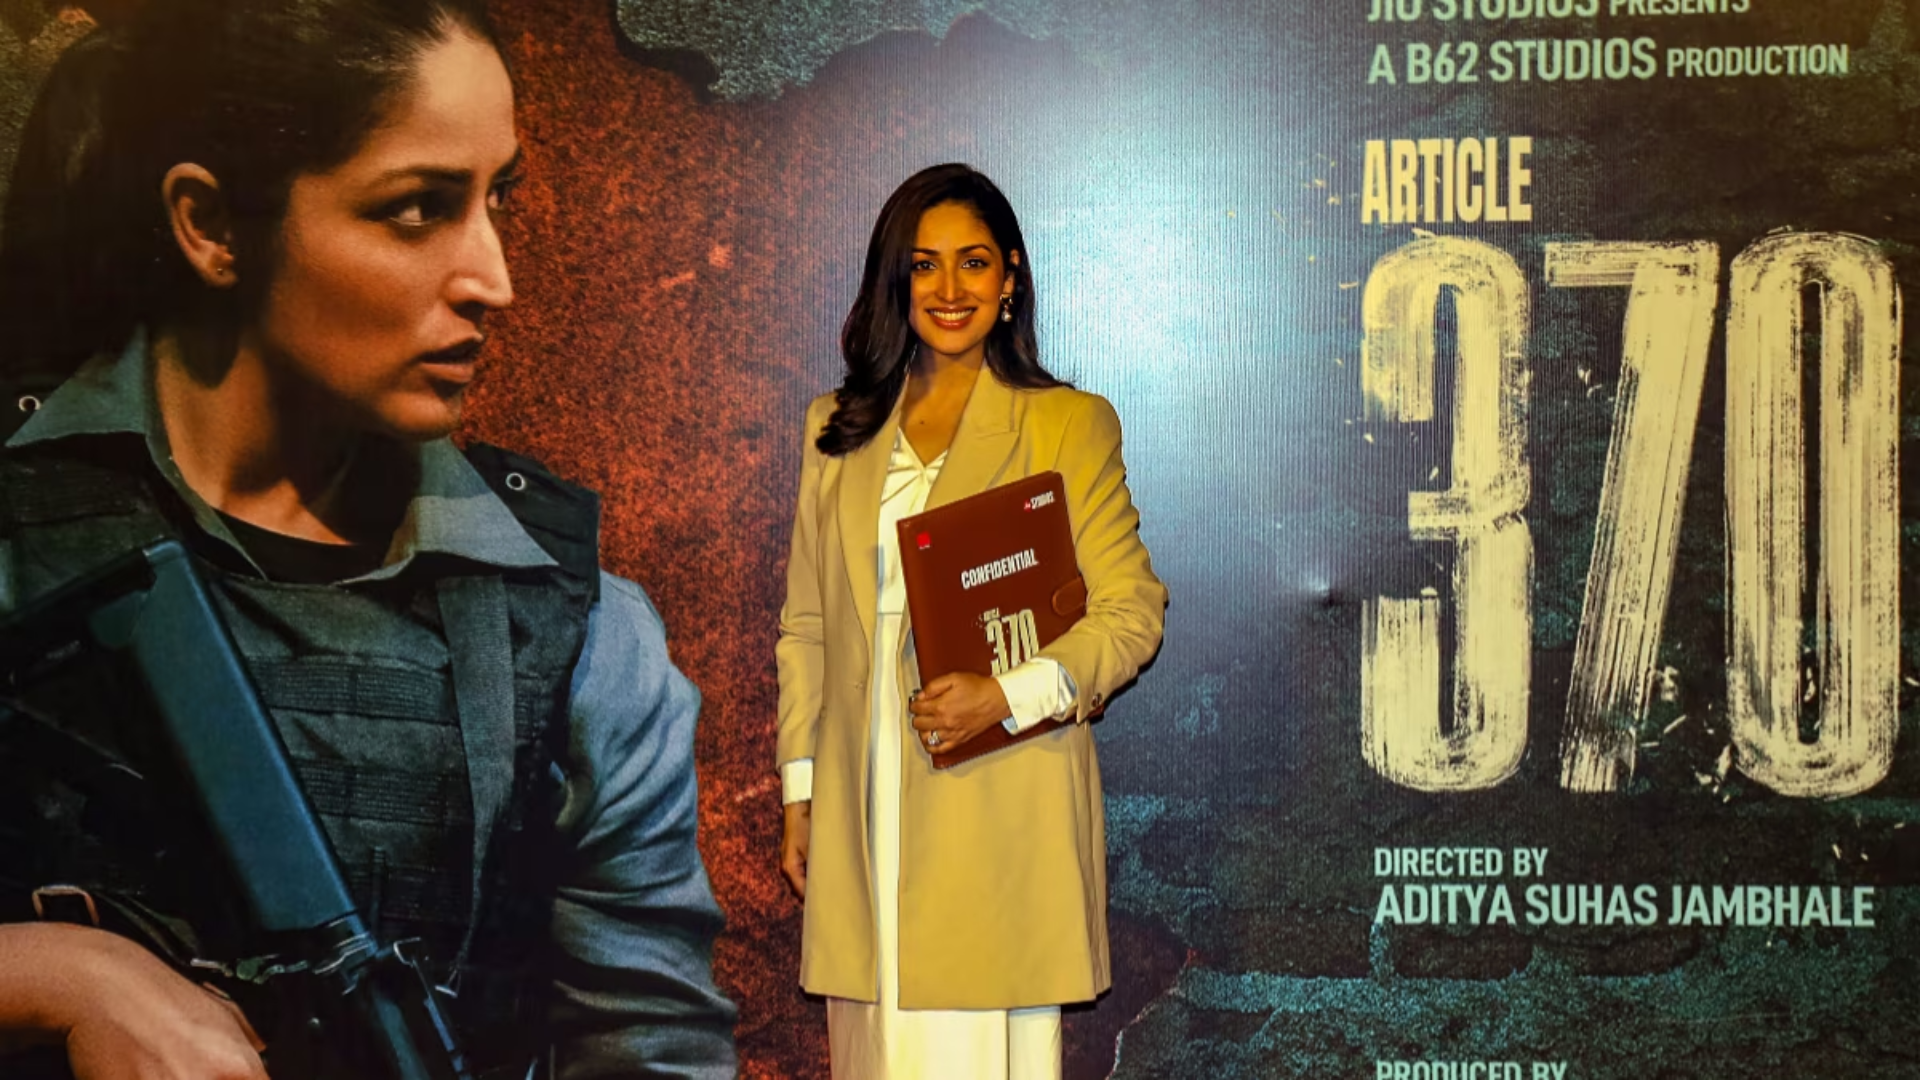 Yami Gautam’s ‘Article 370’ Advance Booking Reaches ₹39.68 Lakh Ahead of Its Release